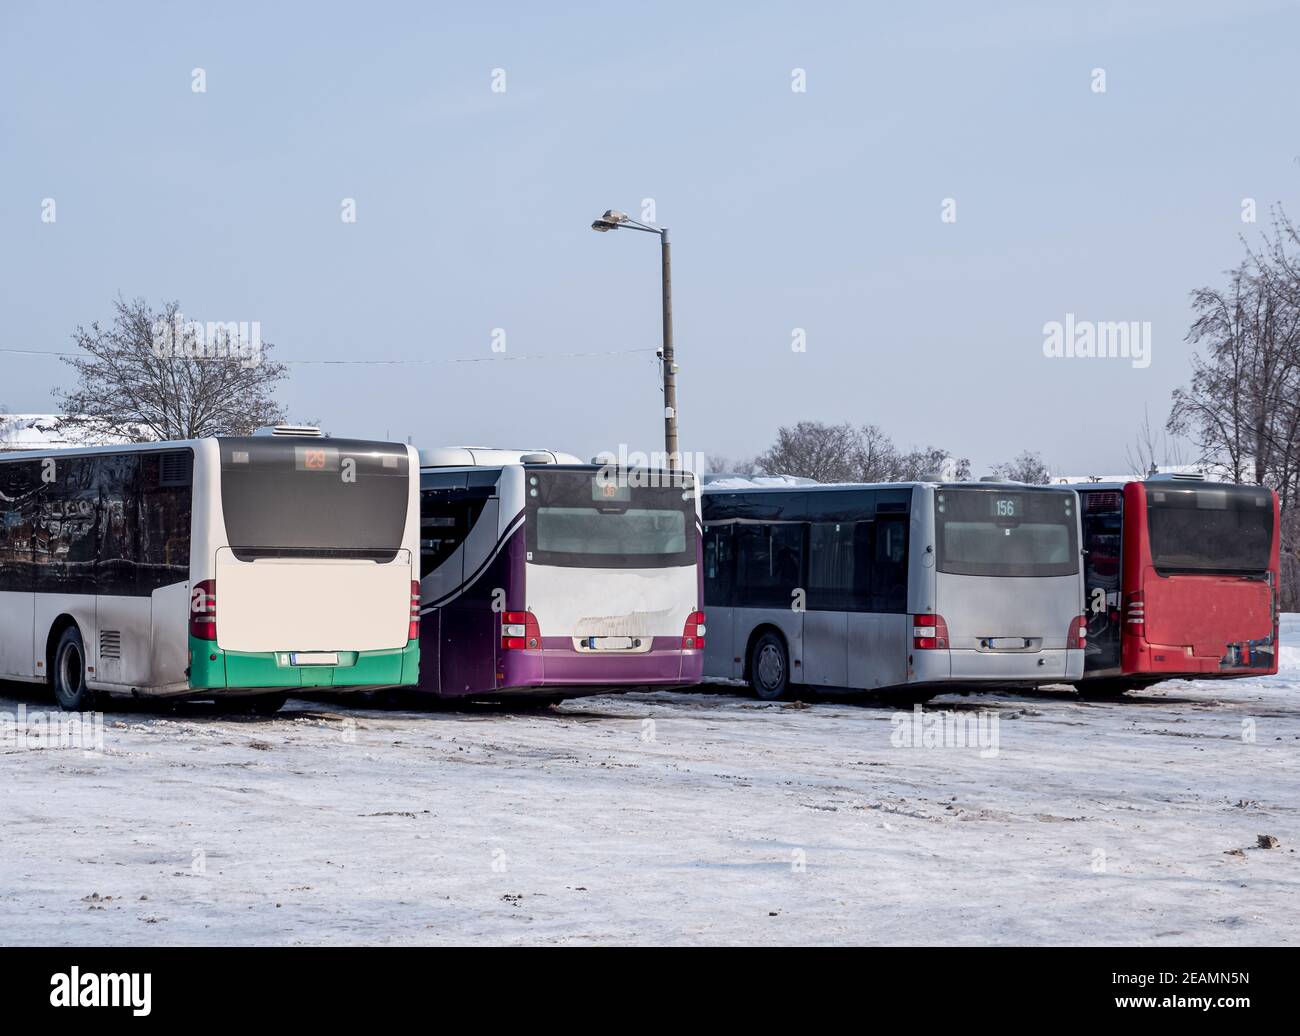 Bus cancellation due to snow chaos Stock Photo